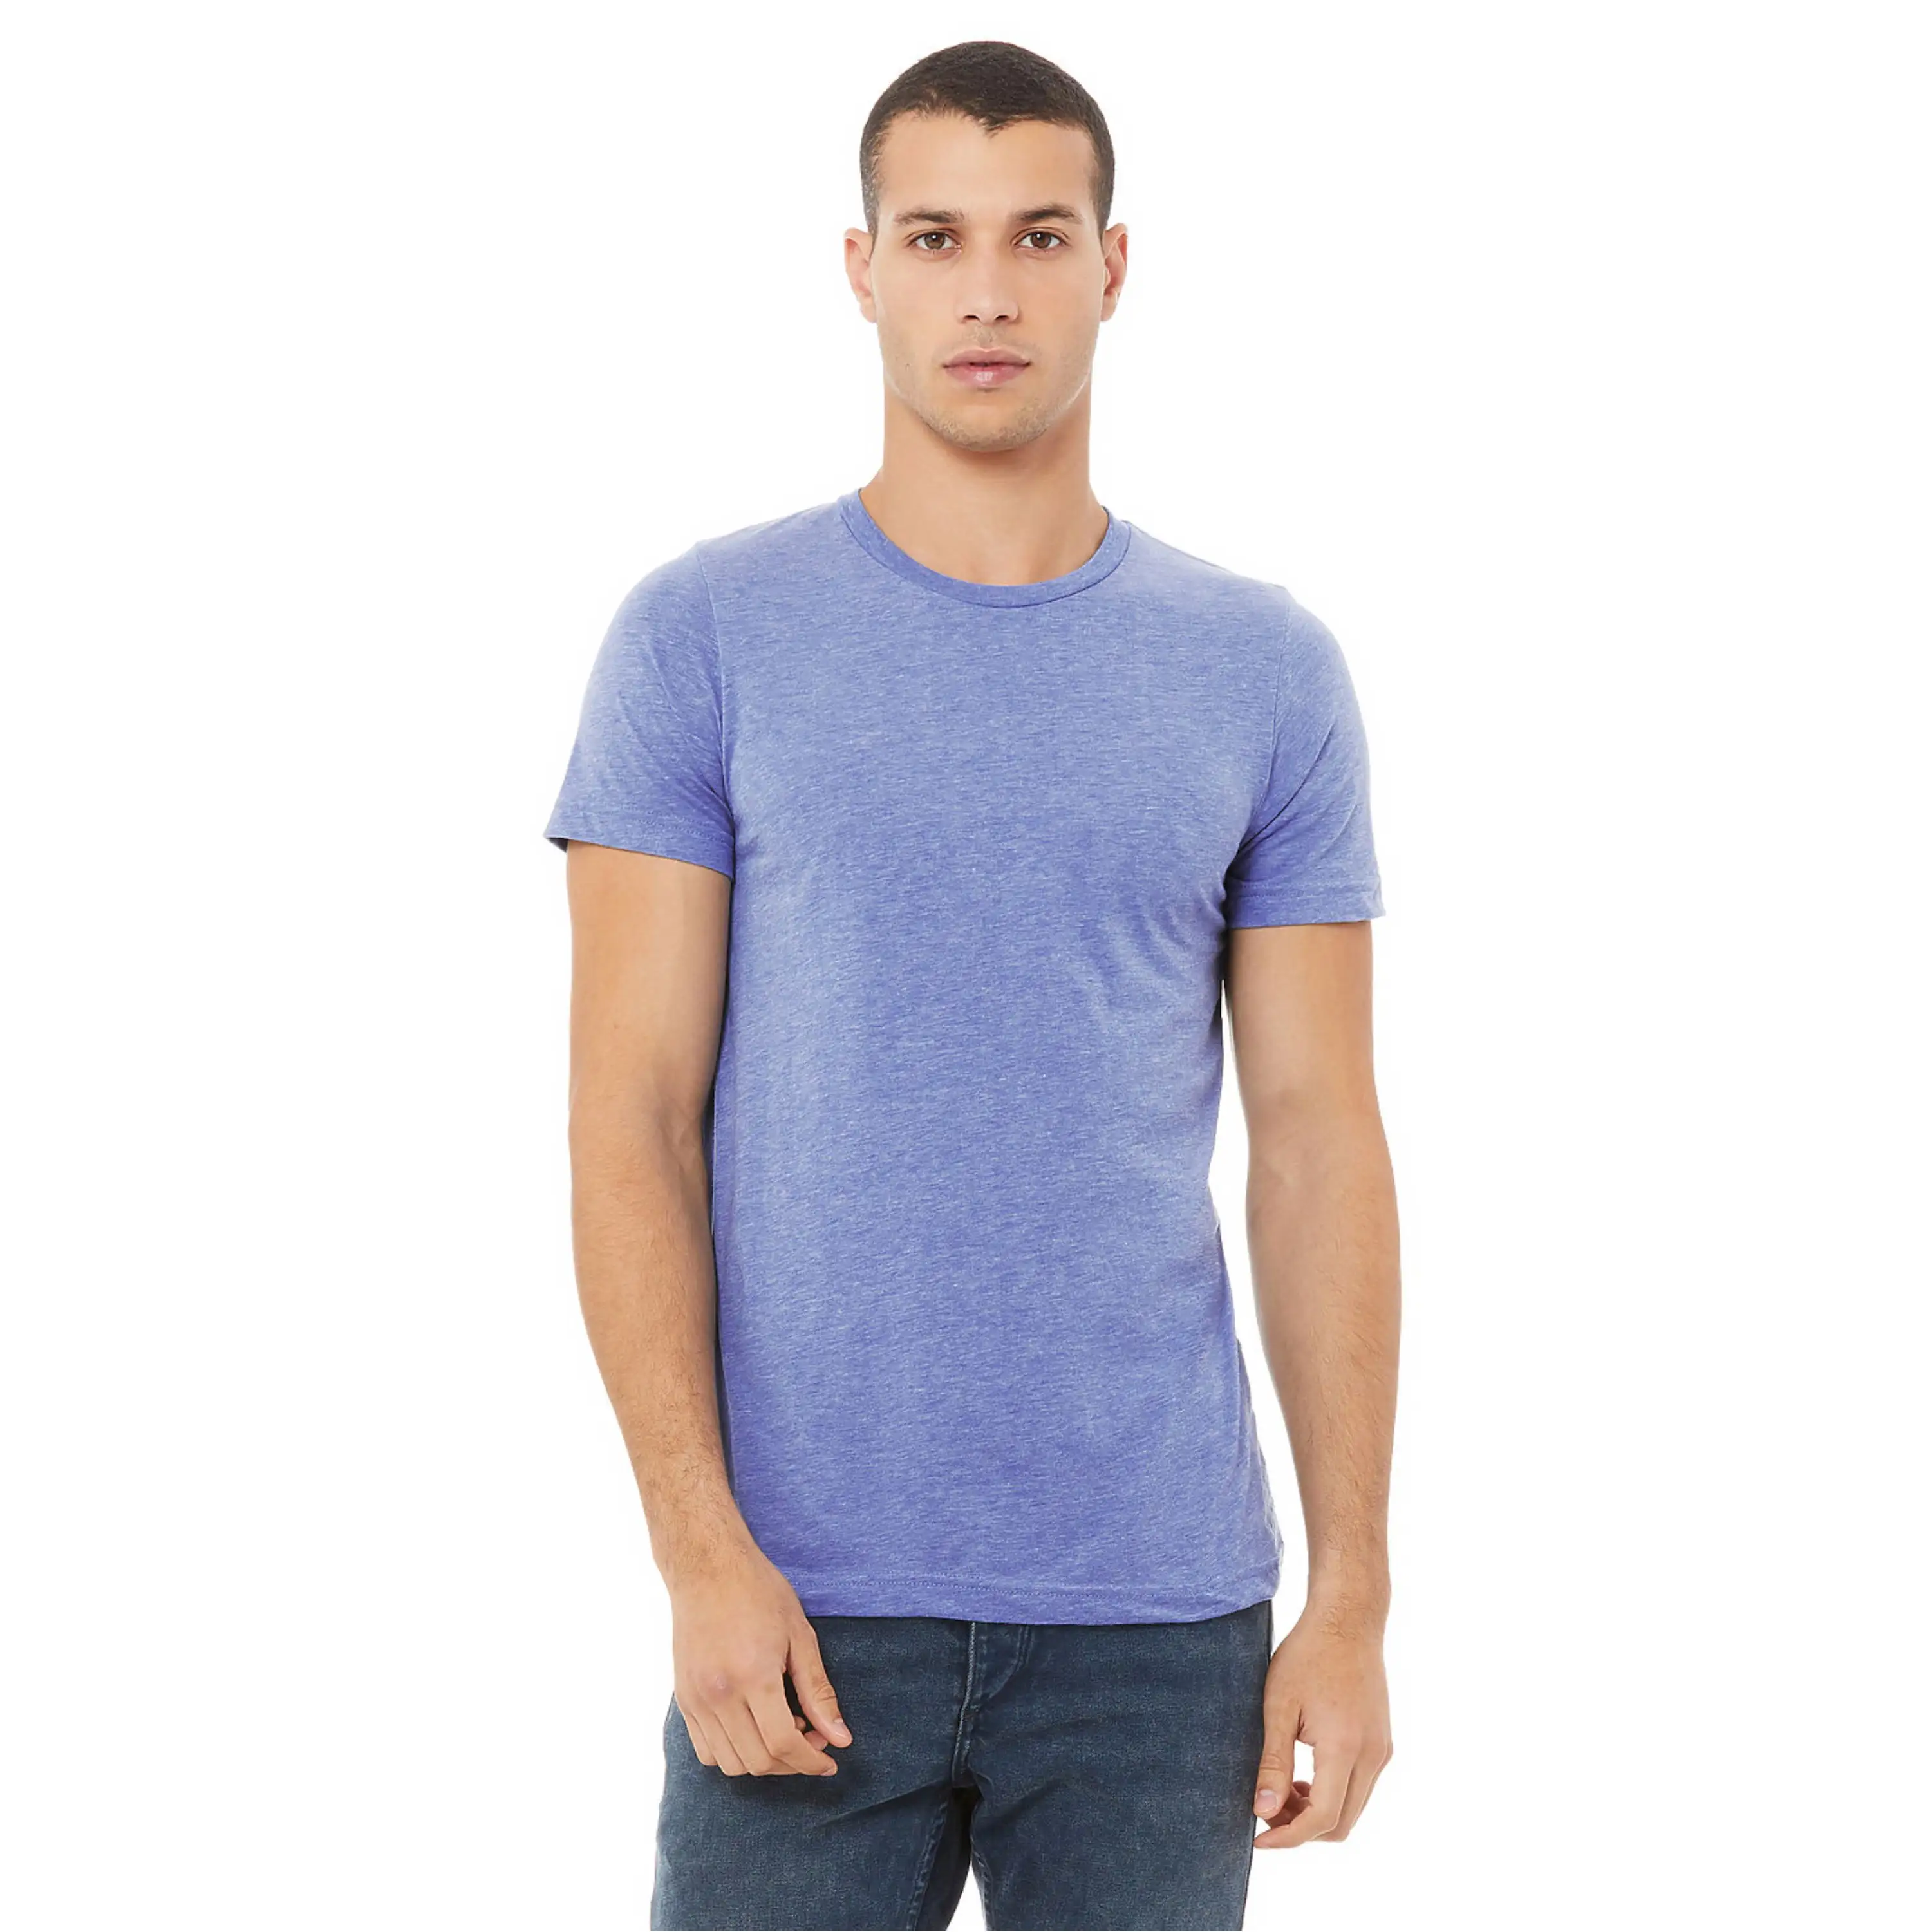 50% Poly 25% Airlume Combed and Ring Spun Cotton 25% Rayon 40 Single 3.8 oz Blue Unisex Triblend Short Sleeves T-Shirt